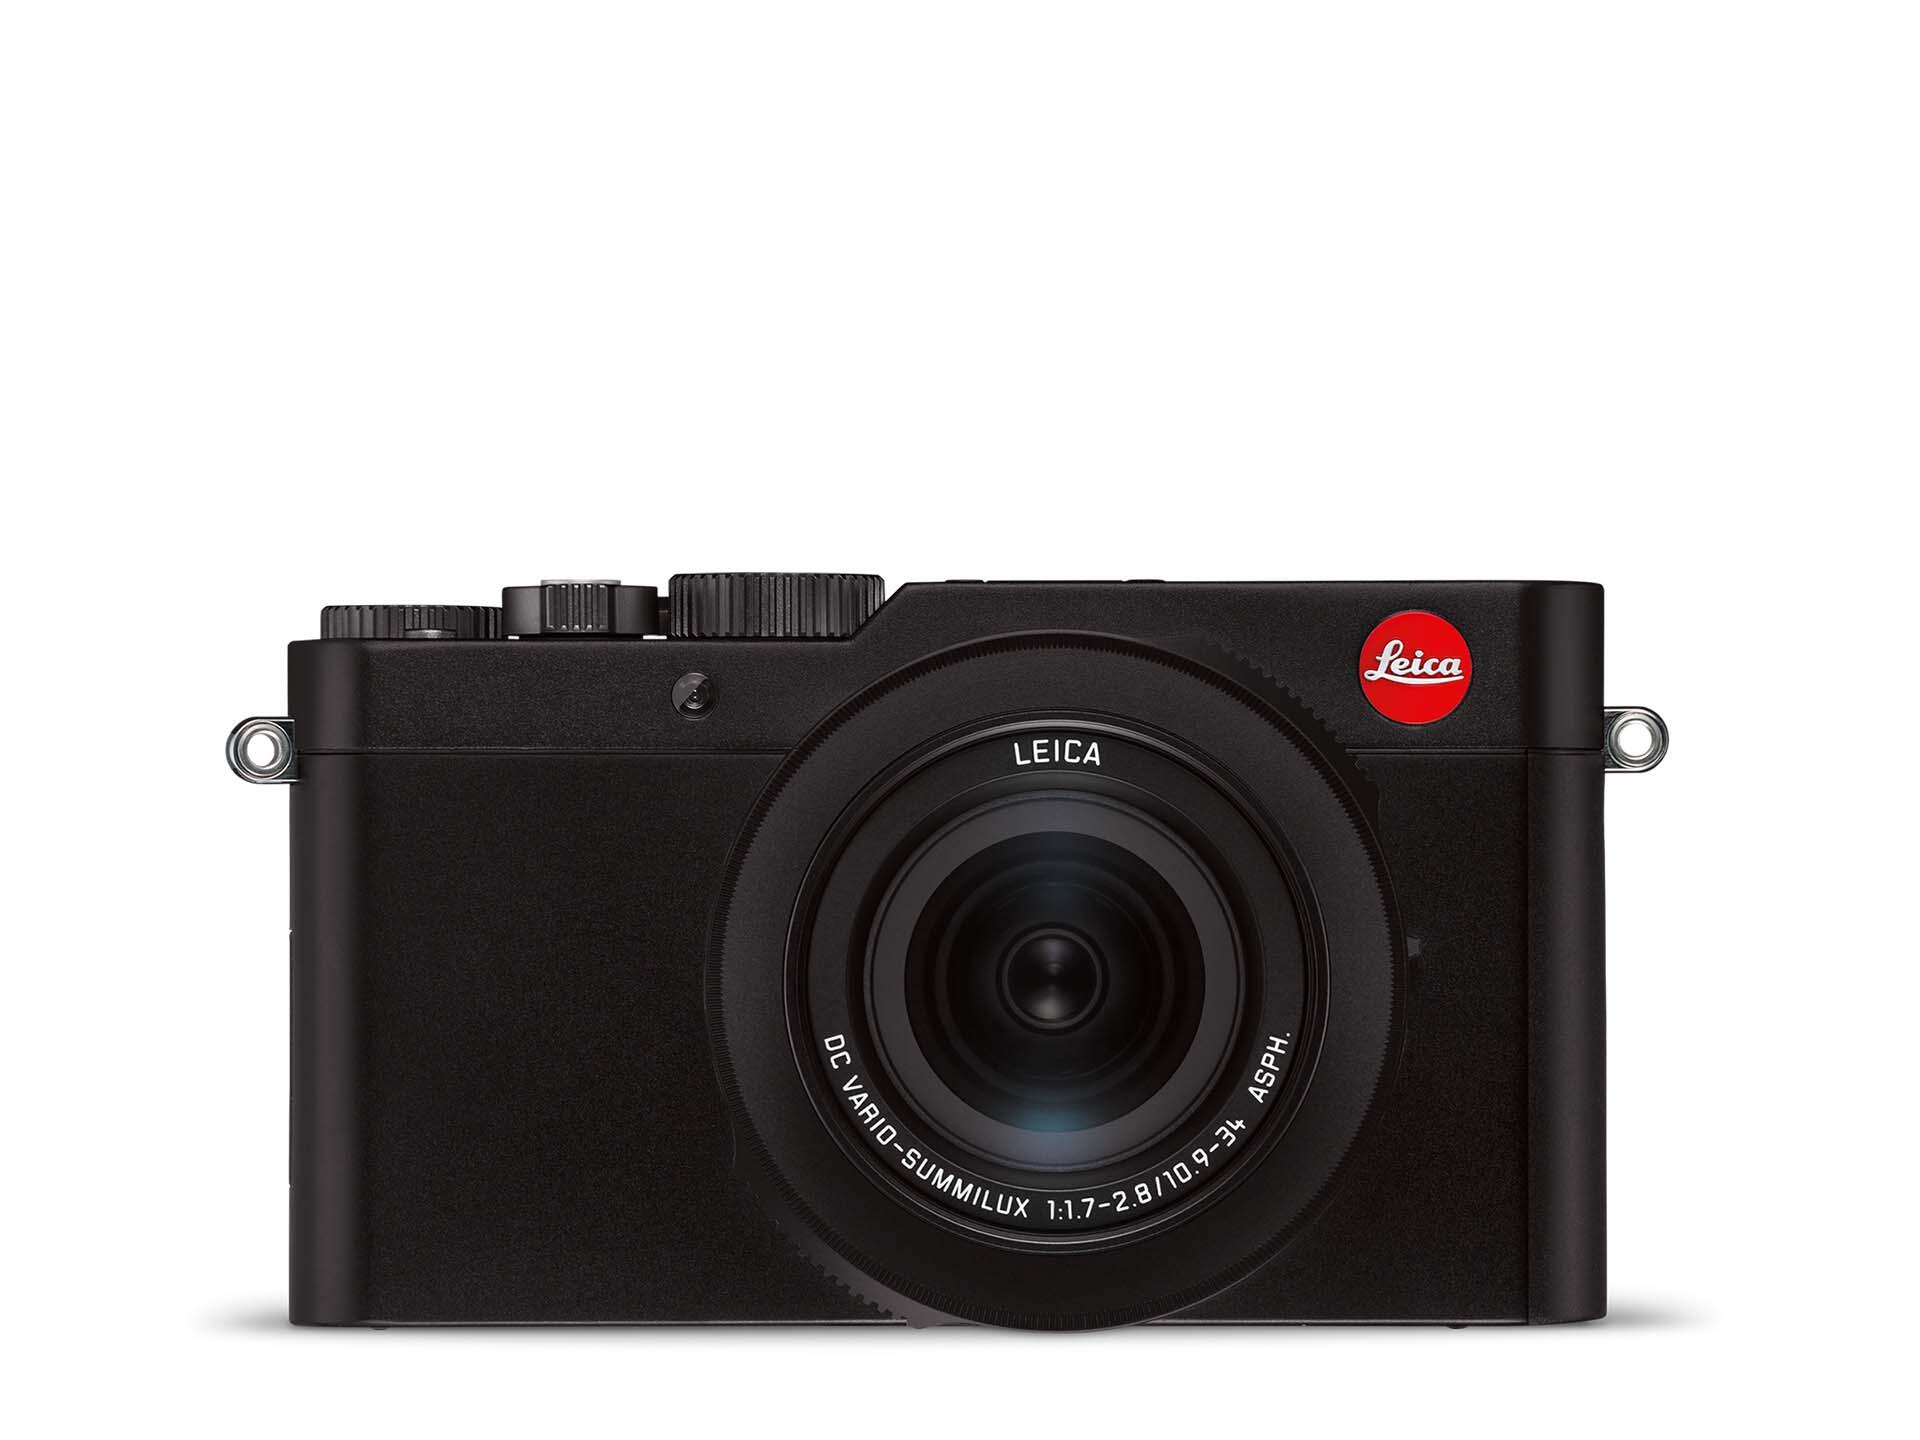 leica d-lux 7 image quality